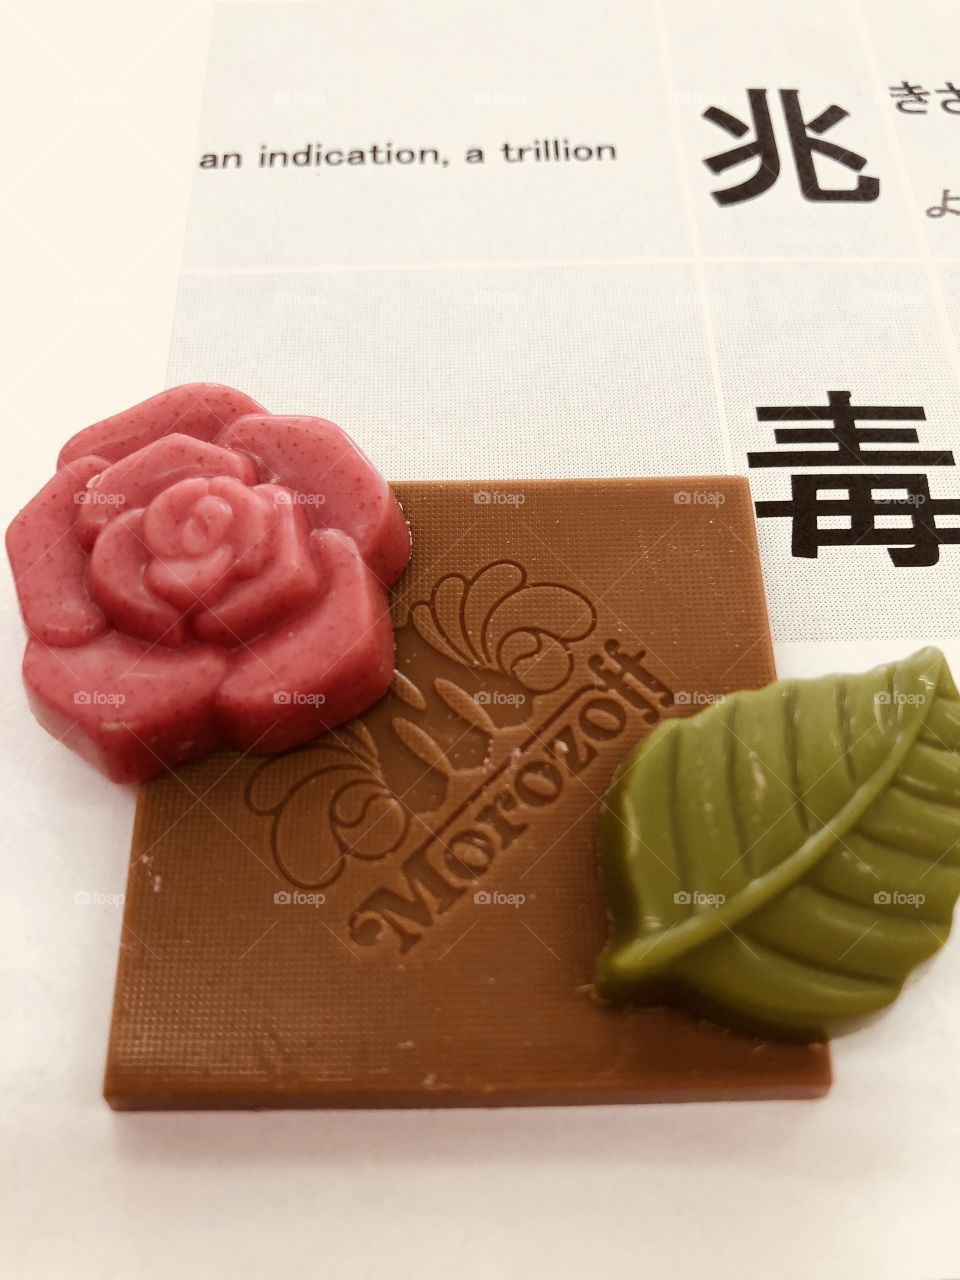 The art in the chocolates 